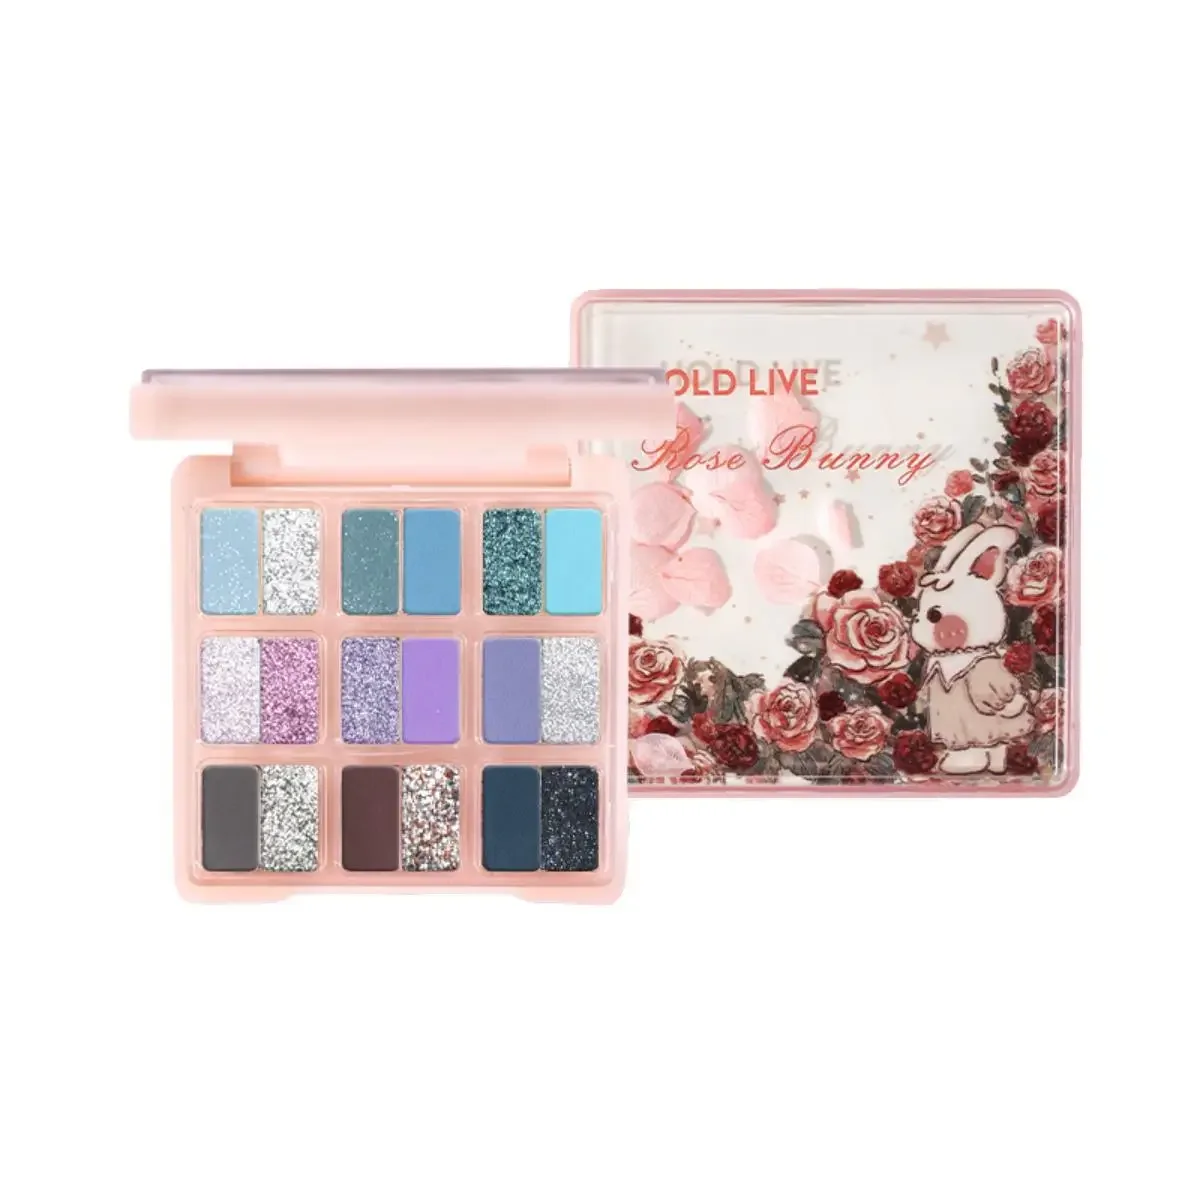 

HOLD LIVE Rose Bunny Sweetheart Garden Eyeshadow Palette 18-Color Pearlescent Matte Eye Shadow Rare Beauty Makeup Cosmetics